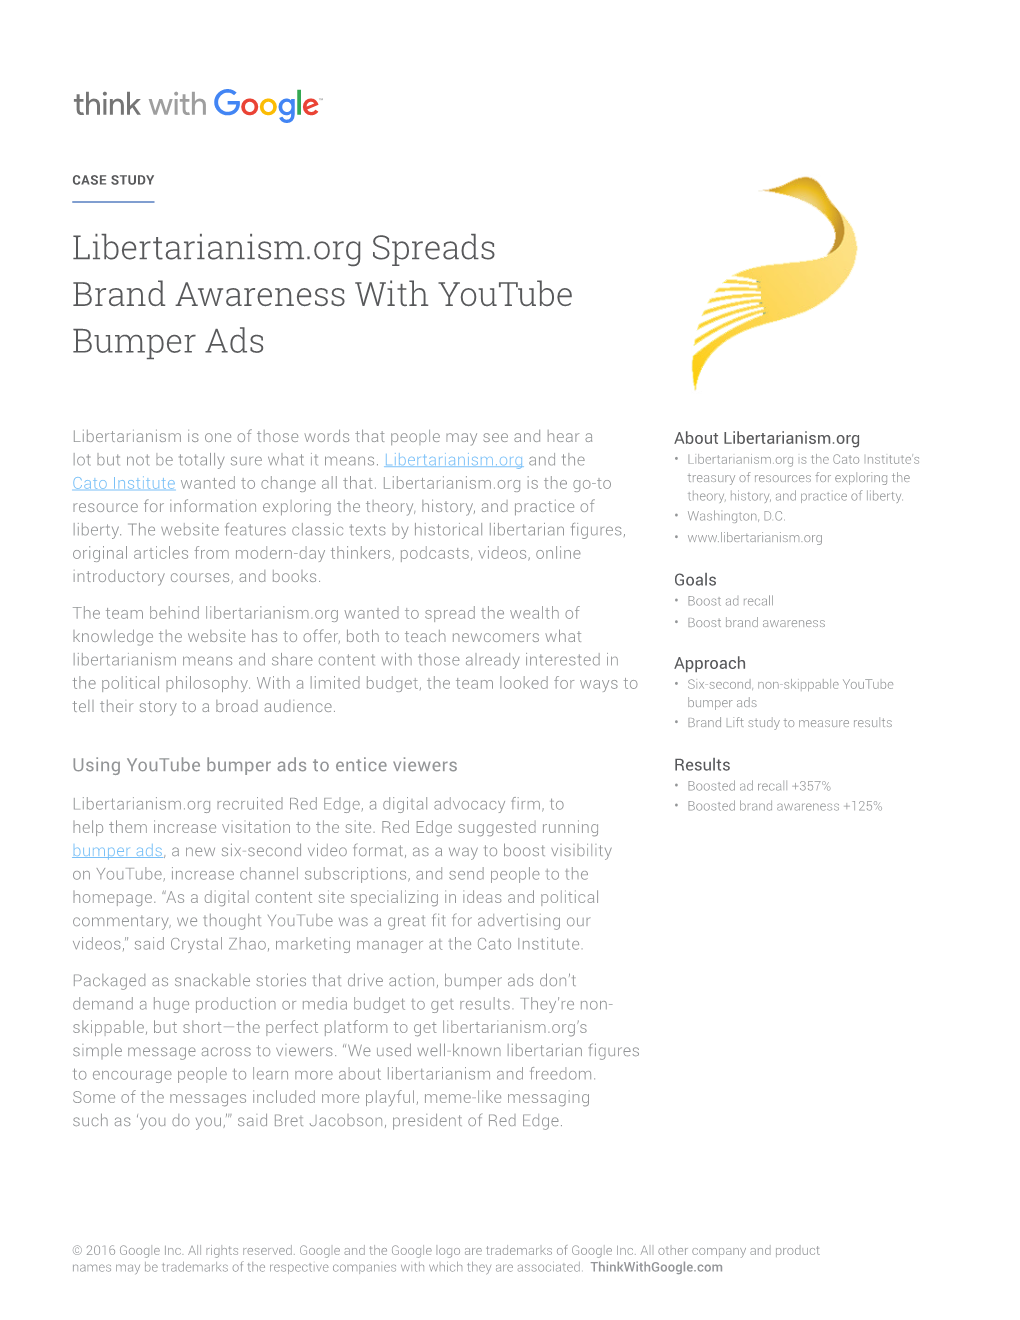 Libertarianism.Org Spreads Brand Awareness with Youtube Bumper Ads